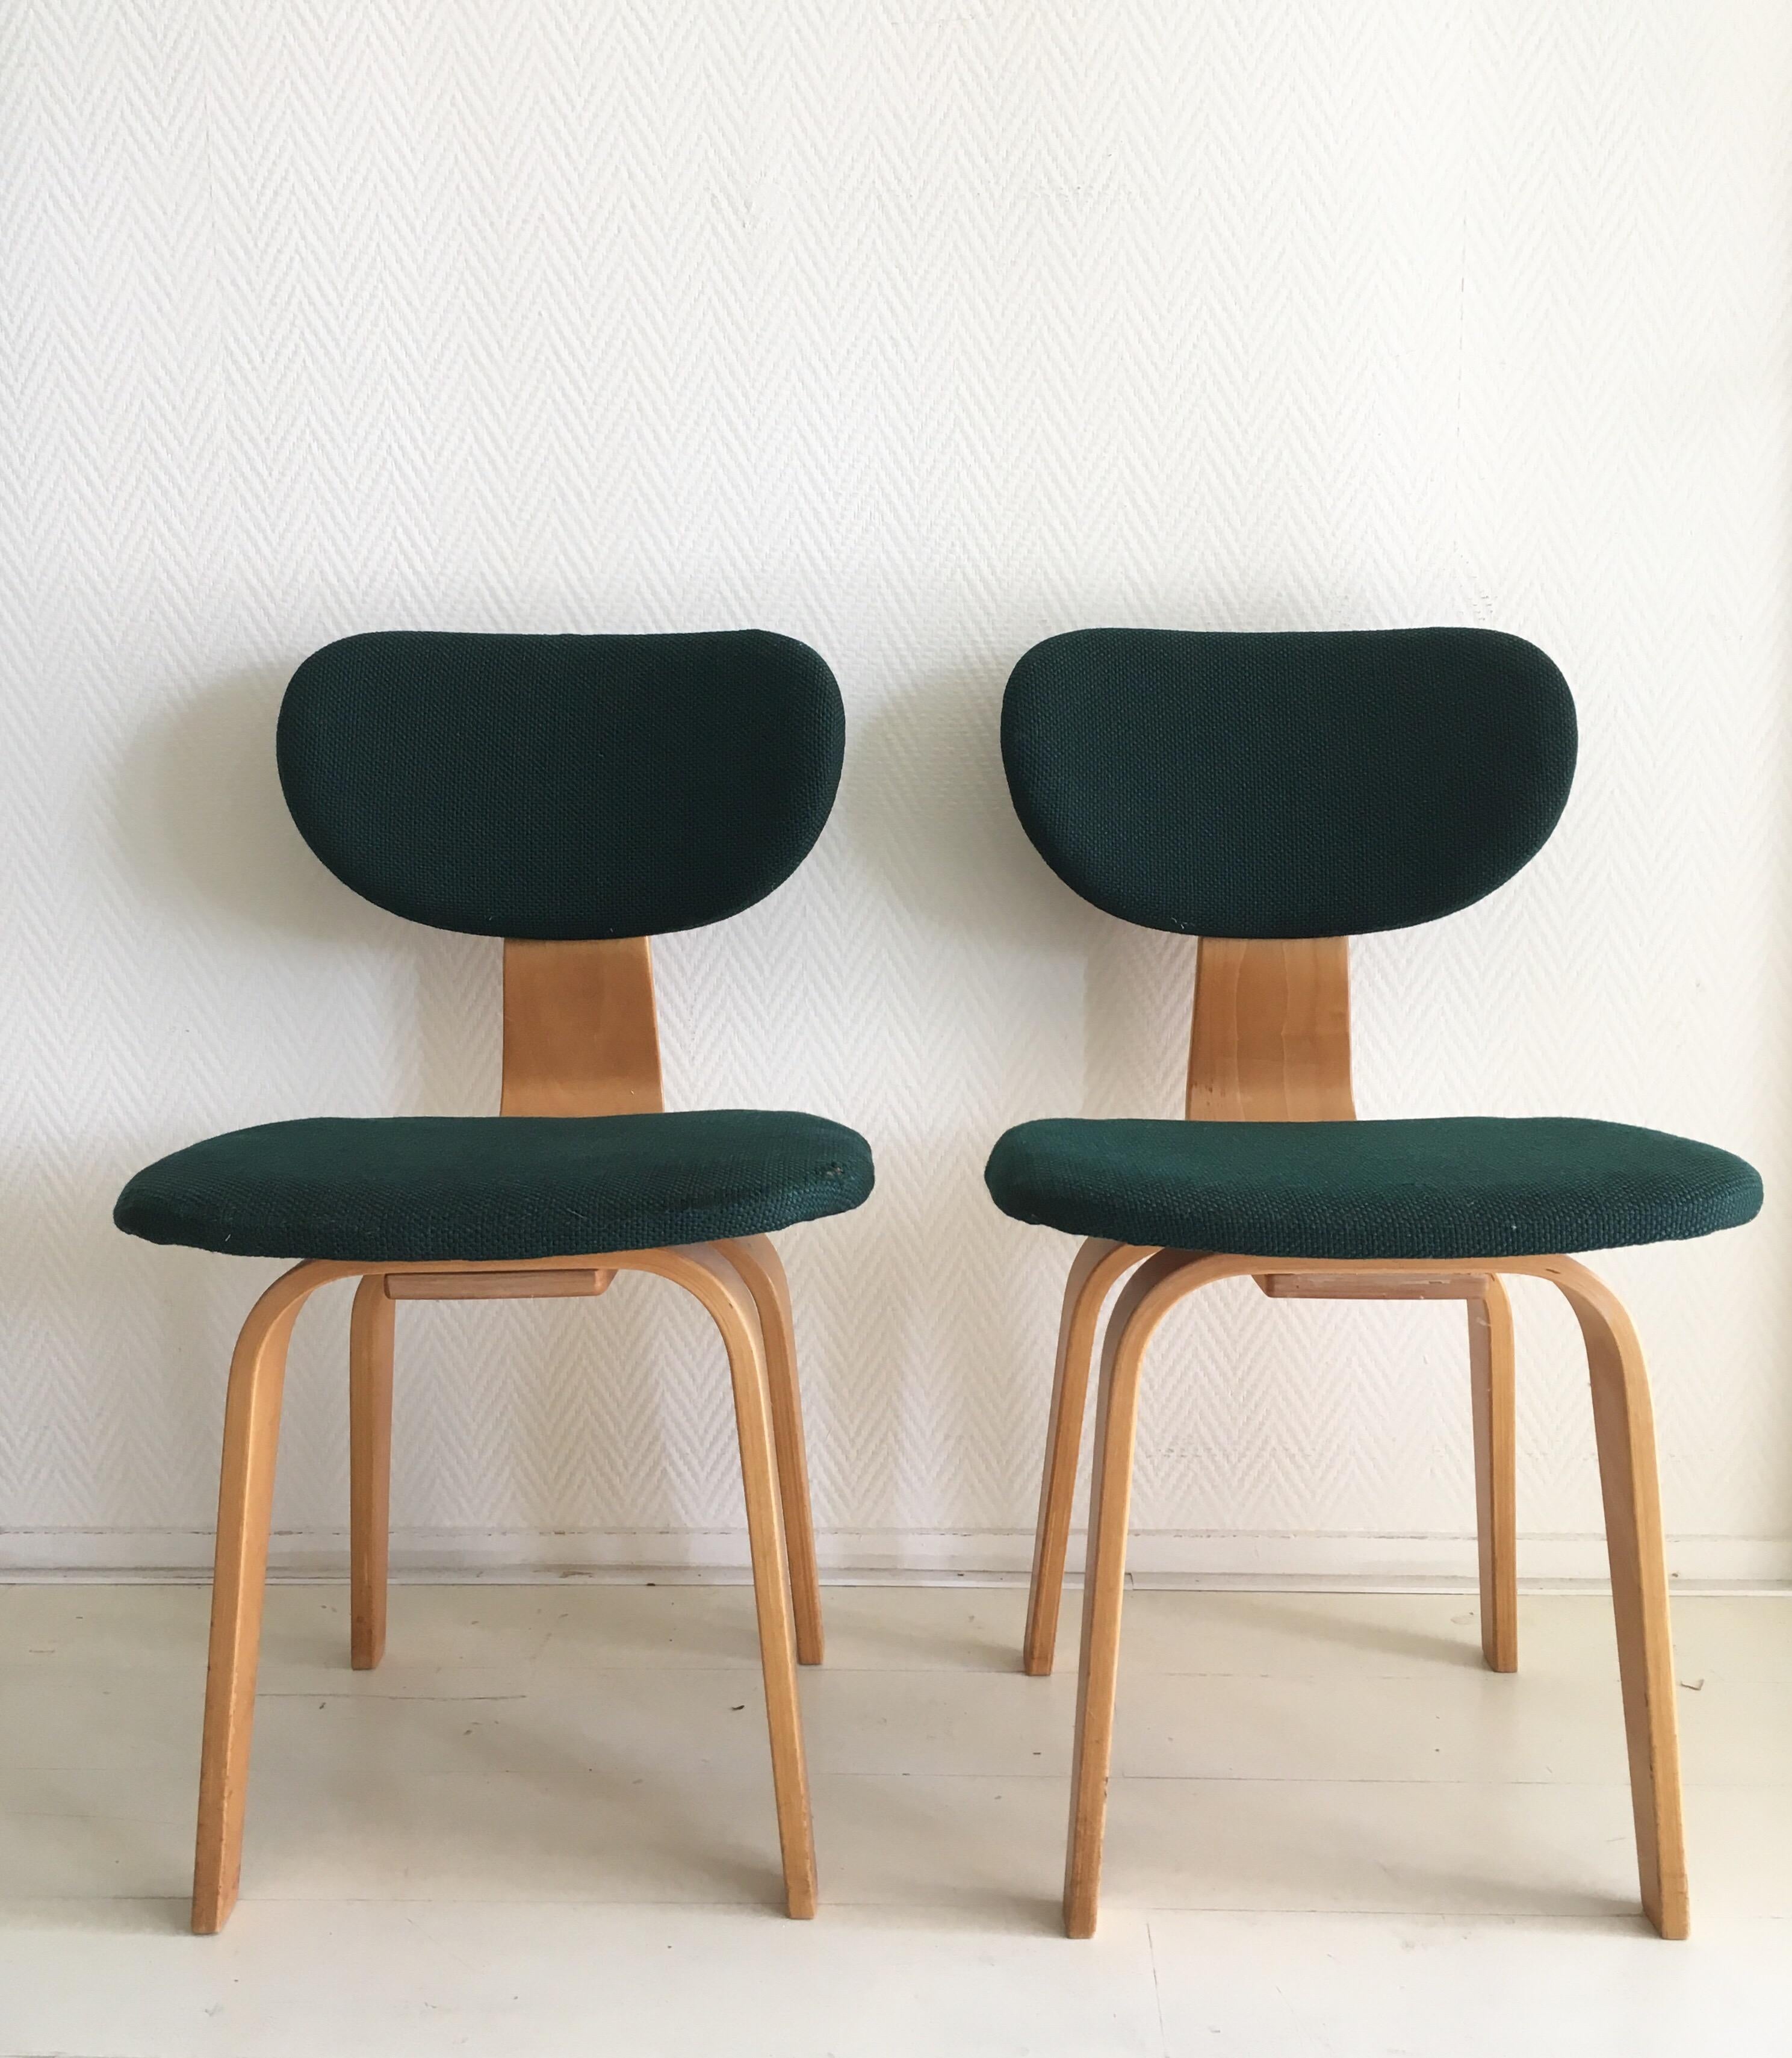 Stunning pair of birch and plywood chairs with green upholstery. They were designed by Cees Braakman for Pastoe in the 1950s (Combex Series). The chairs remain in very good condition, with some wear to the fabric and wear consistent with age and use.